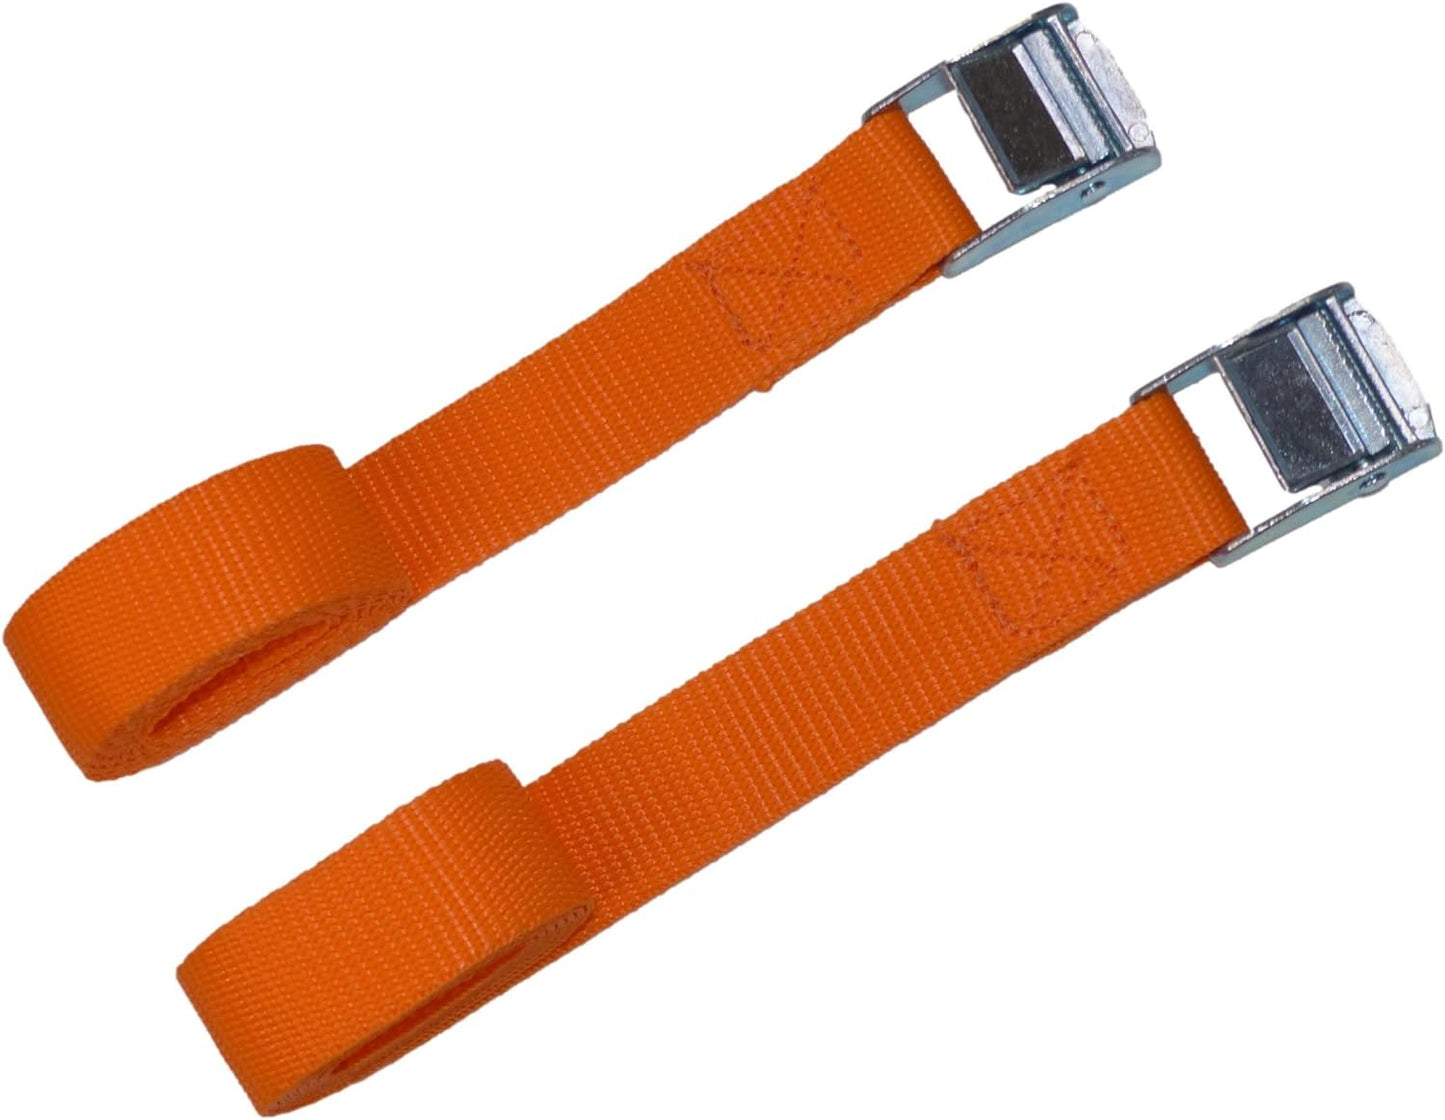 Benristraps 25mm Webbing Strap with Alloy Cam Buckle (Pair)